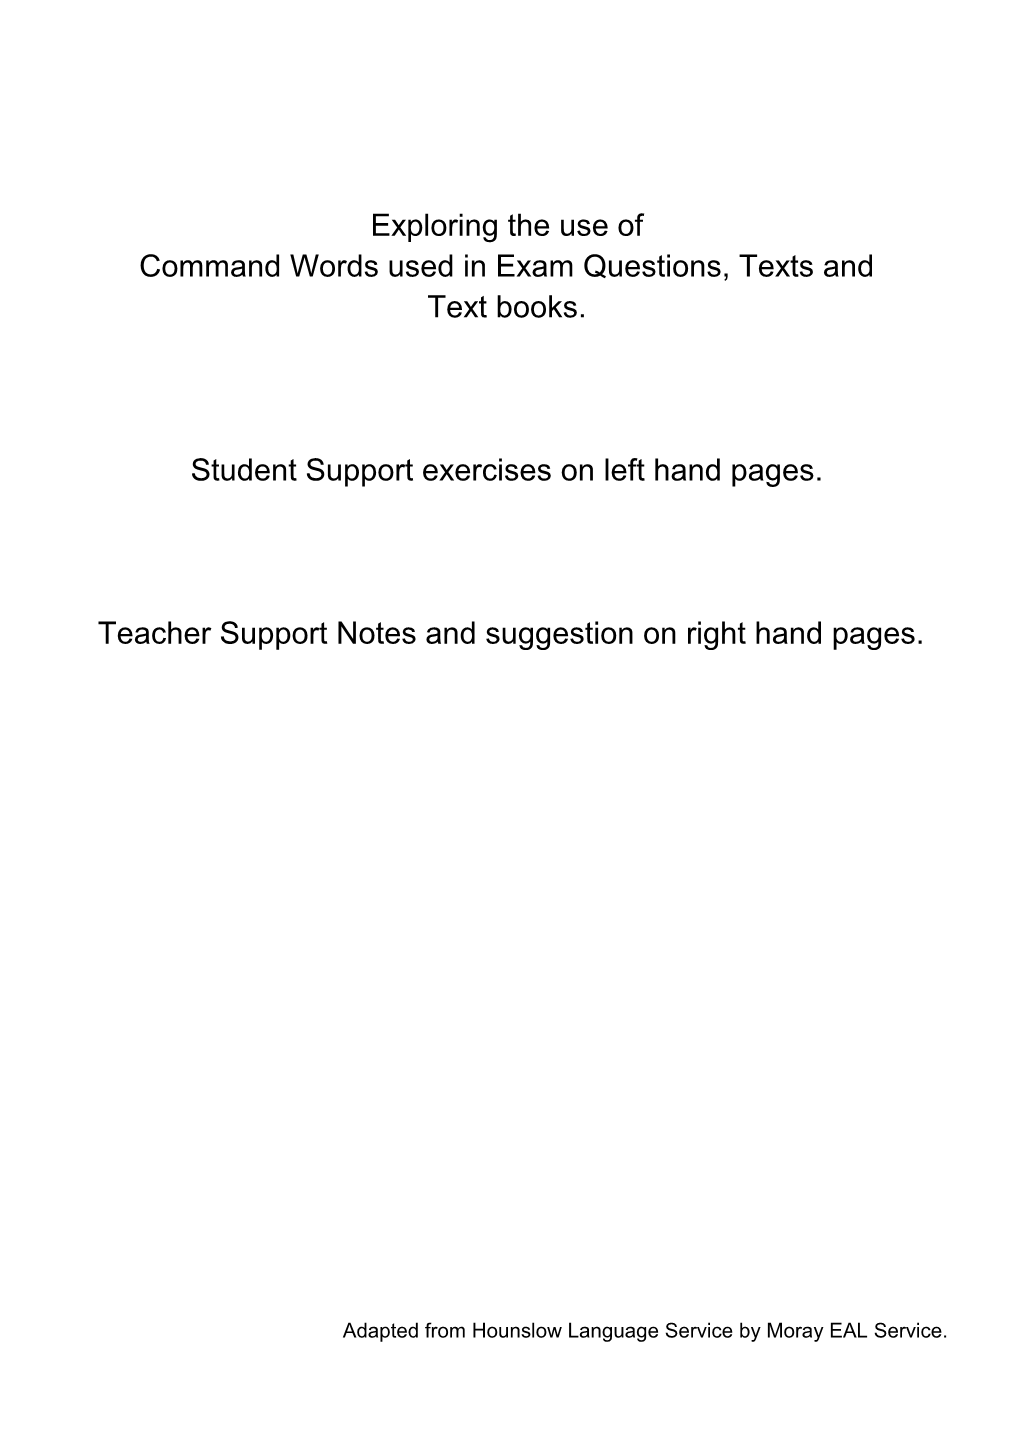 Command Words Used in Exam Questions, Texts And